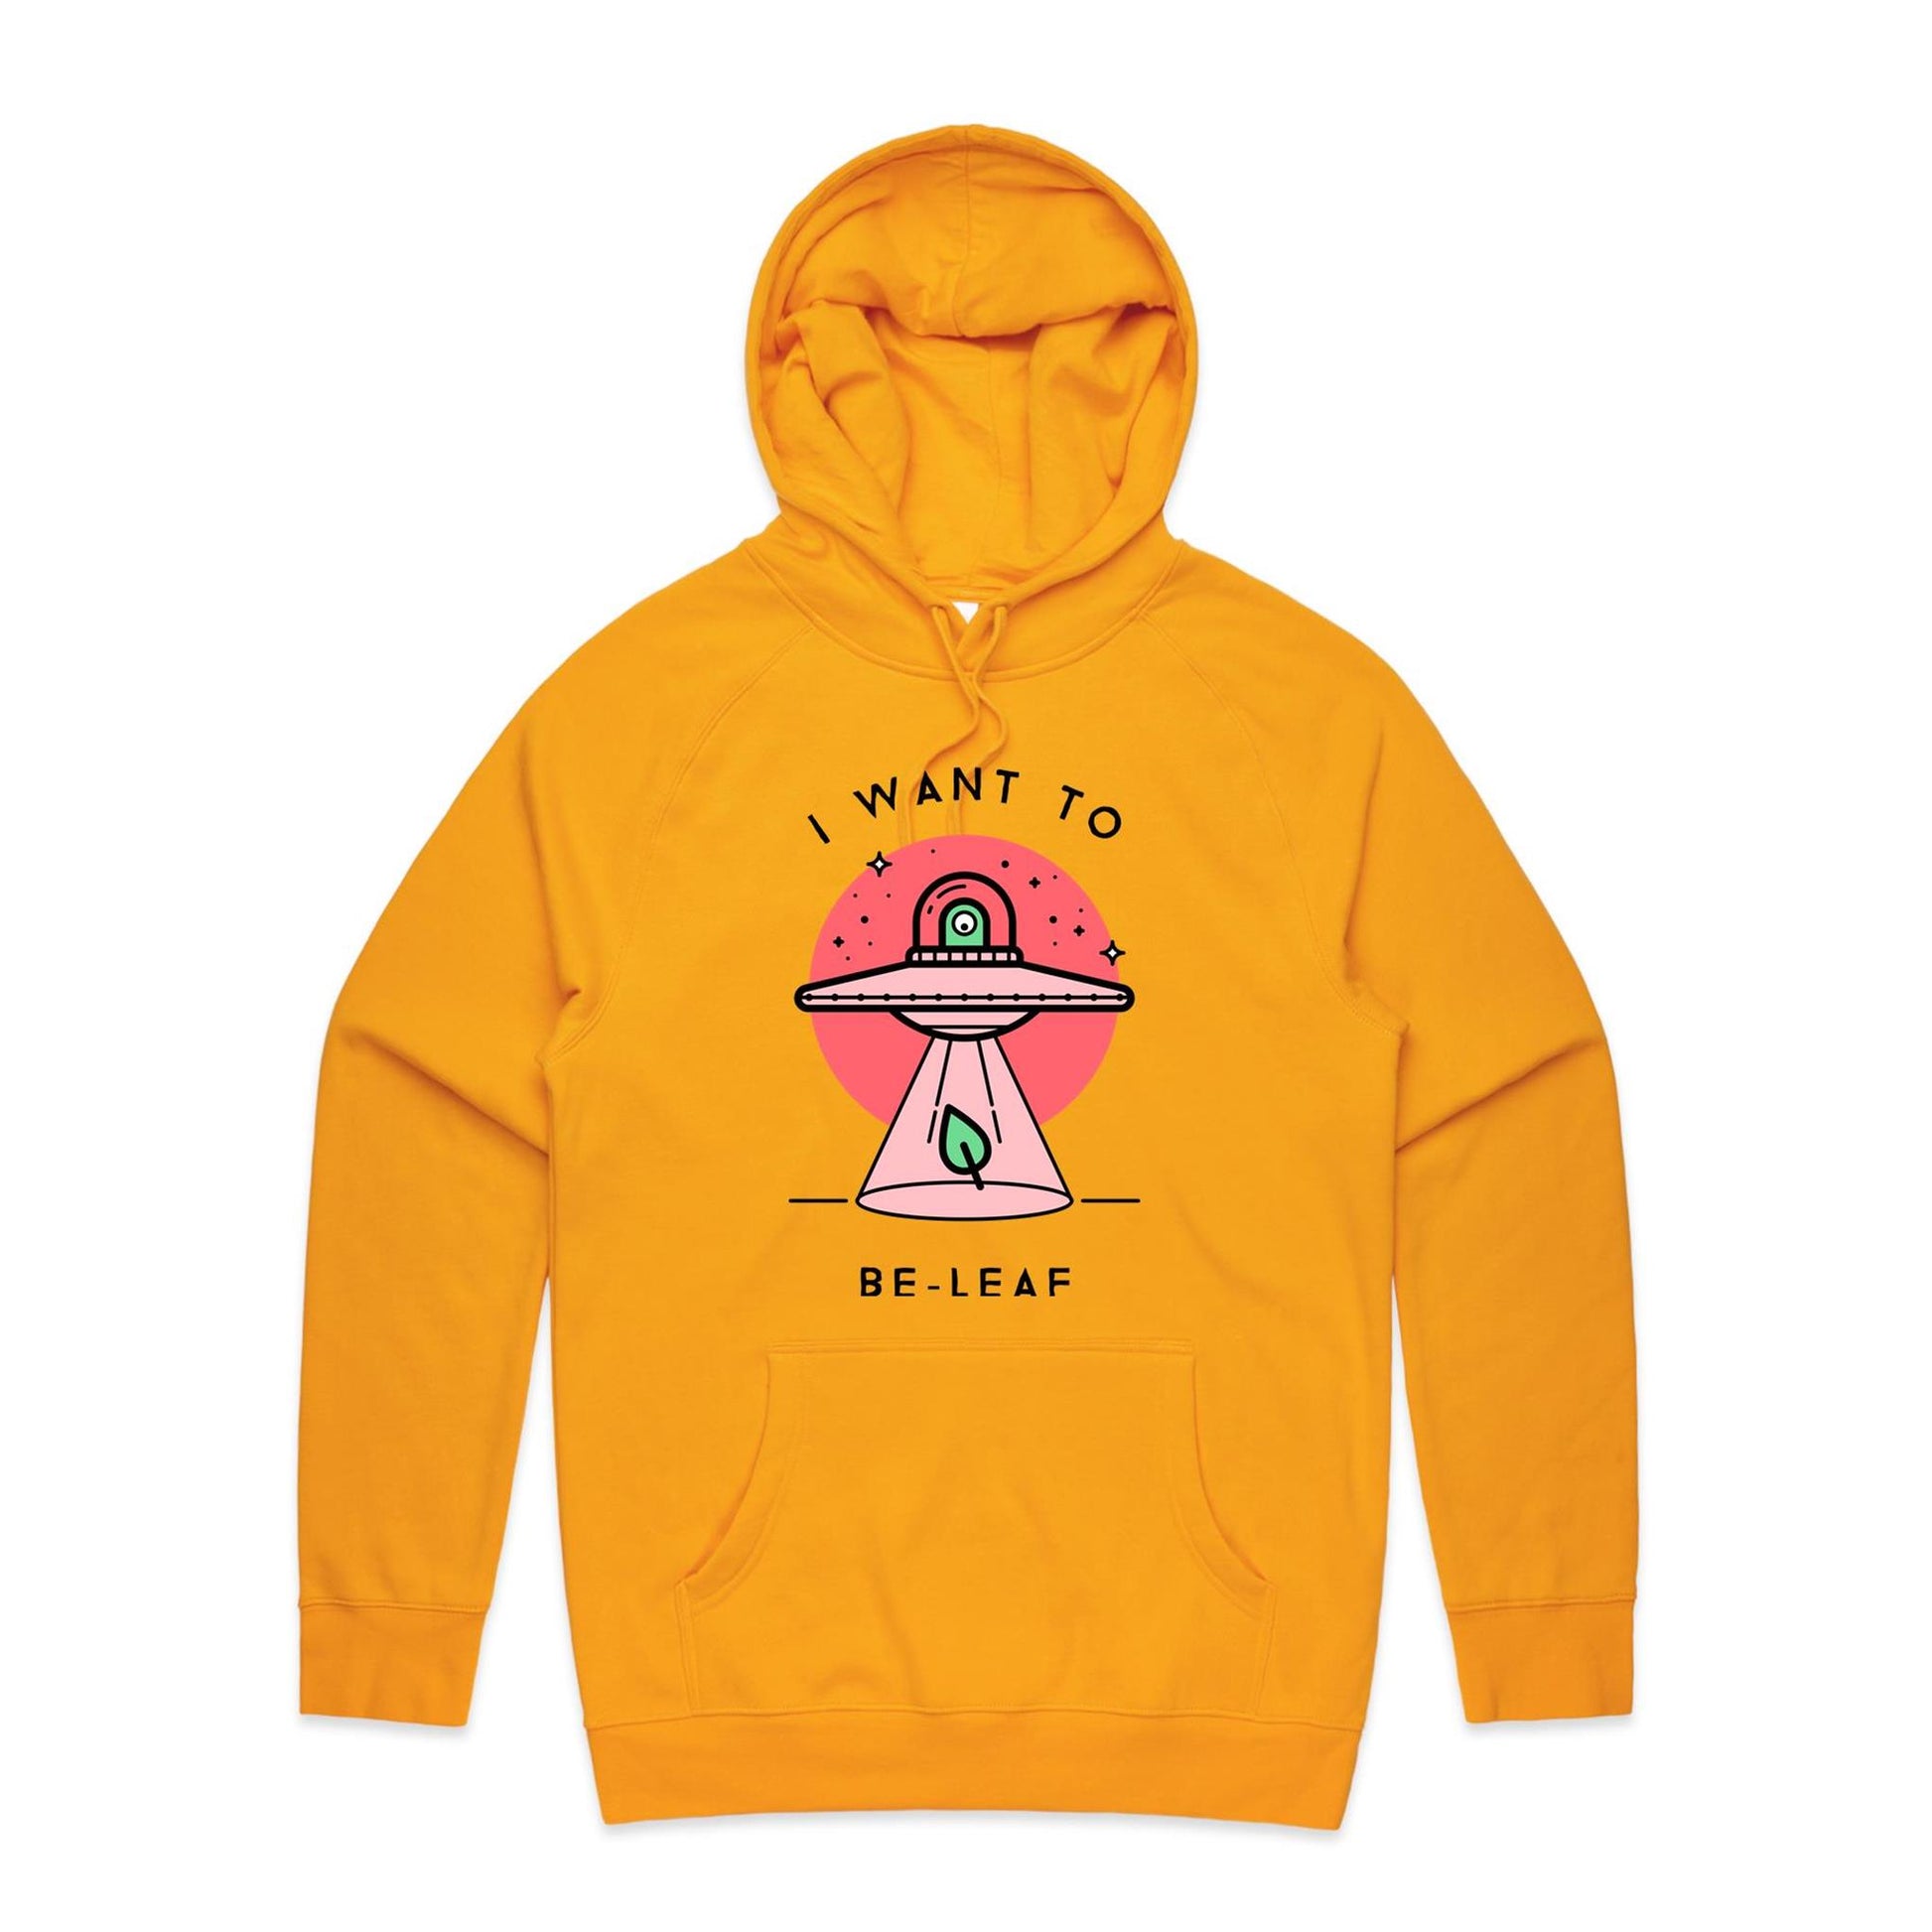 I Want To Be-Leaf (Beleive) - Supply Hood Gold Mens Supply Hoodie